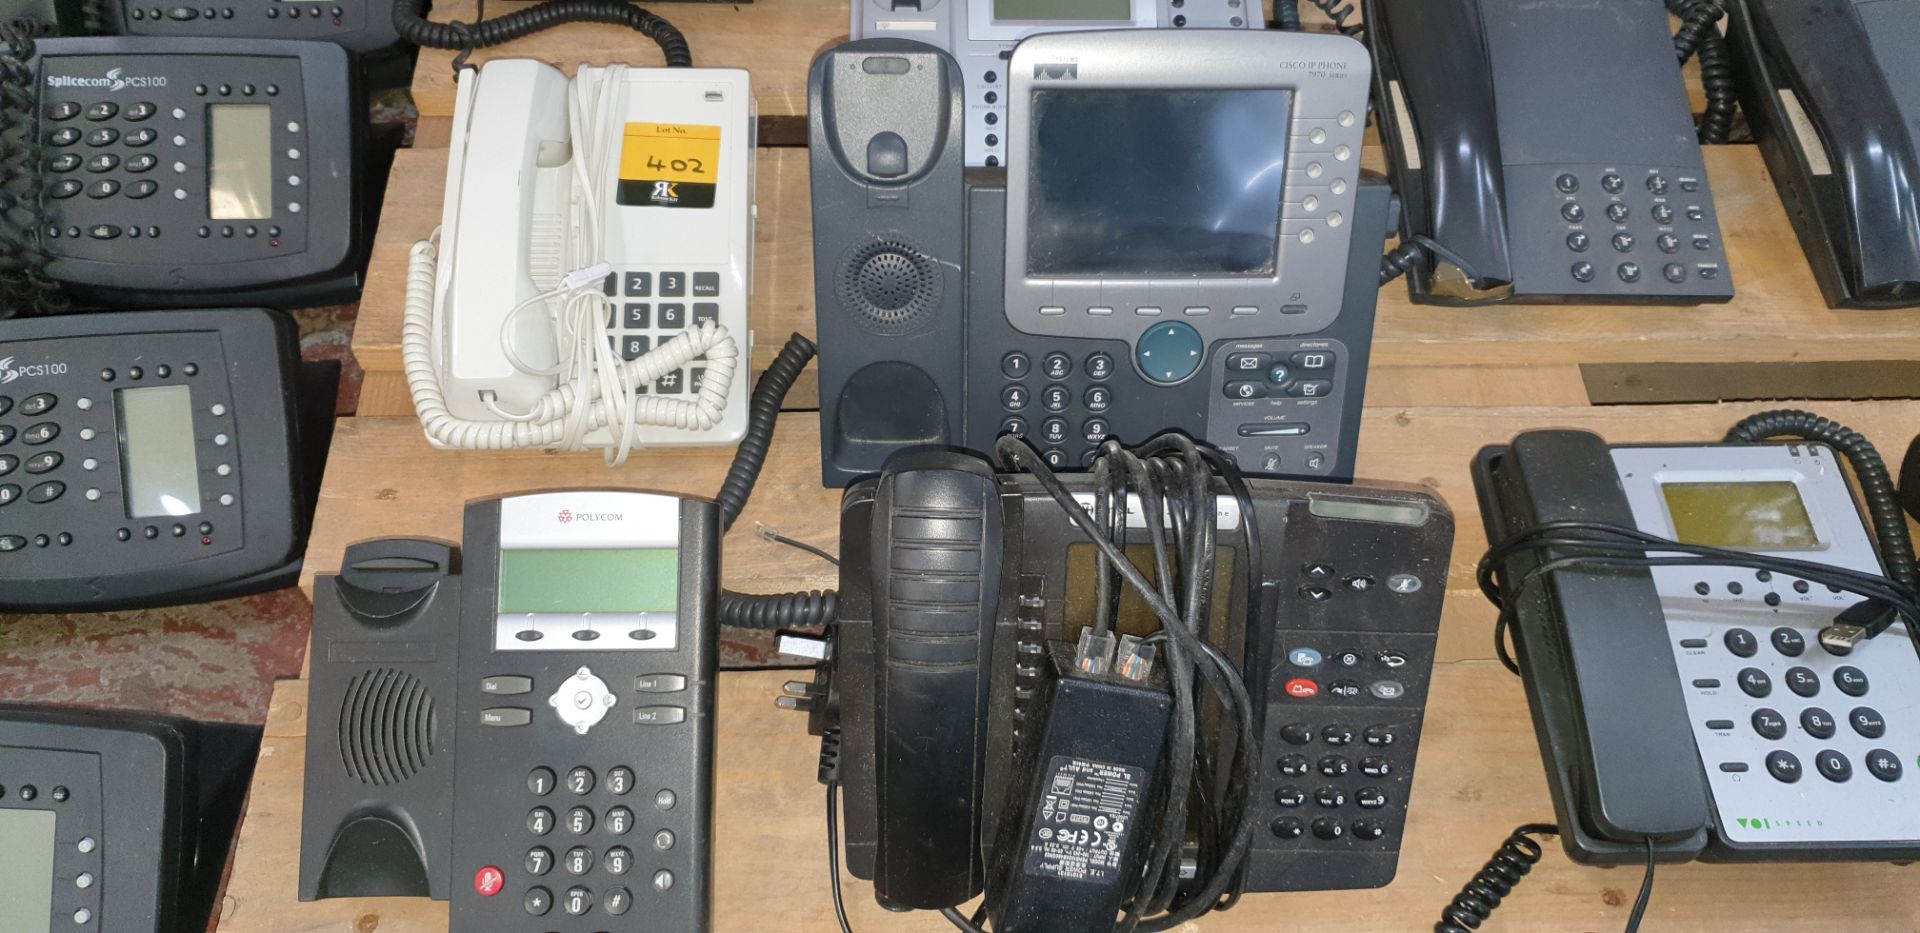 16 off assorted telephone handsets by Polycom, Cisco, Splicecom, Nortel & others - Image 4 of 8